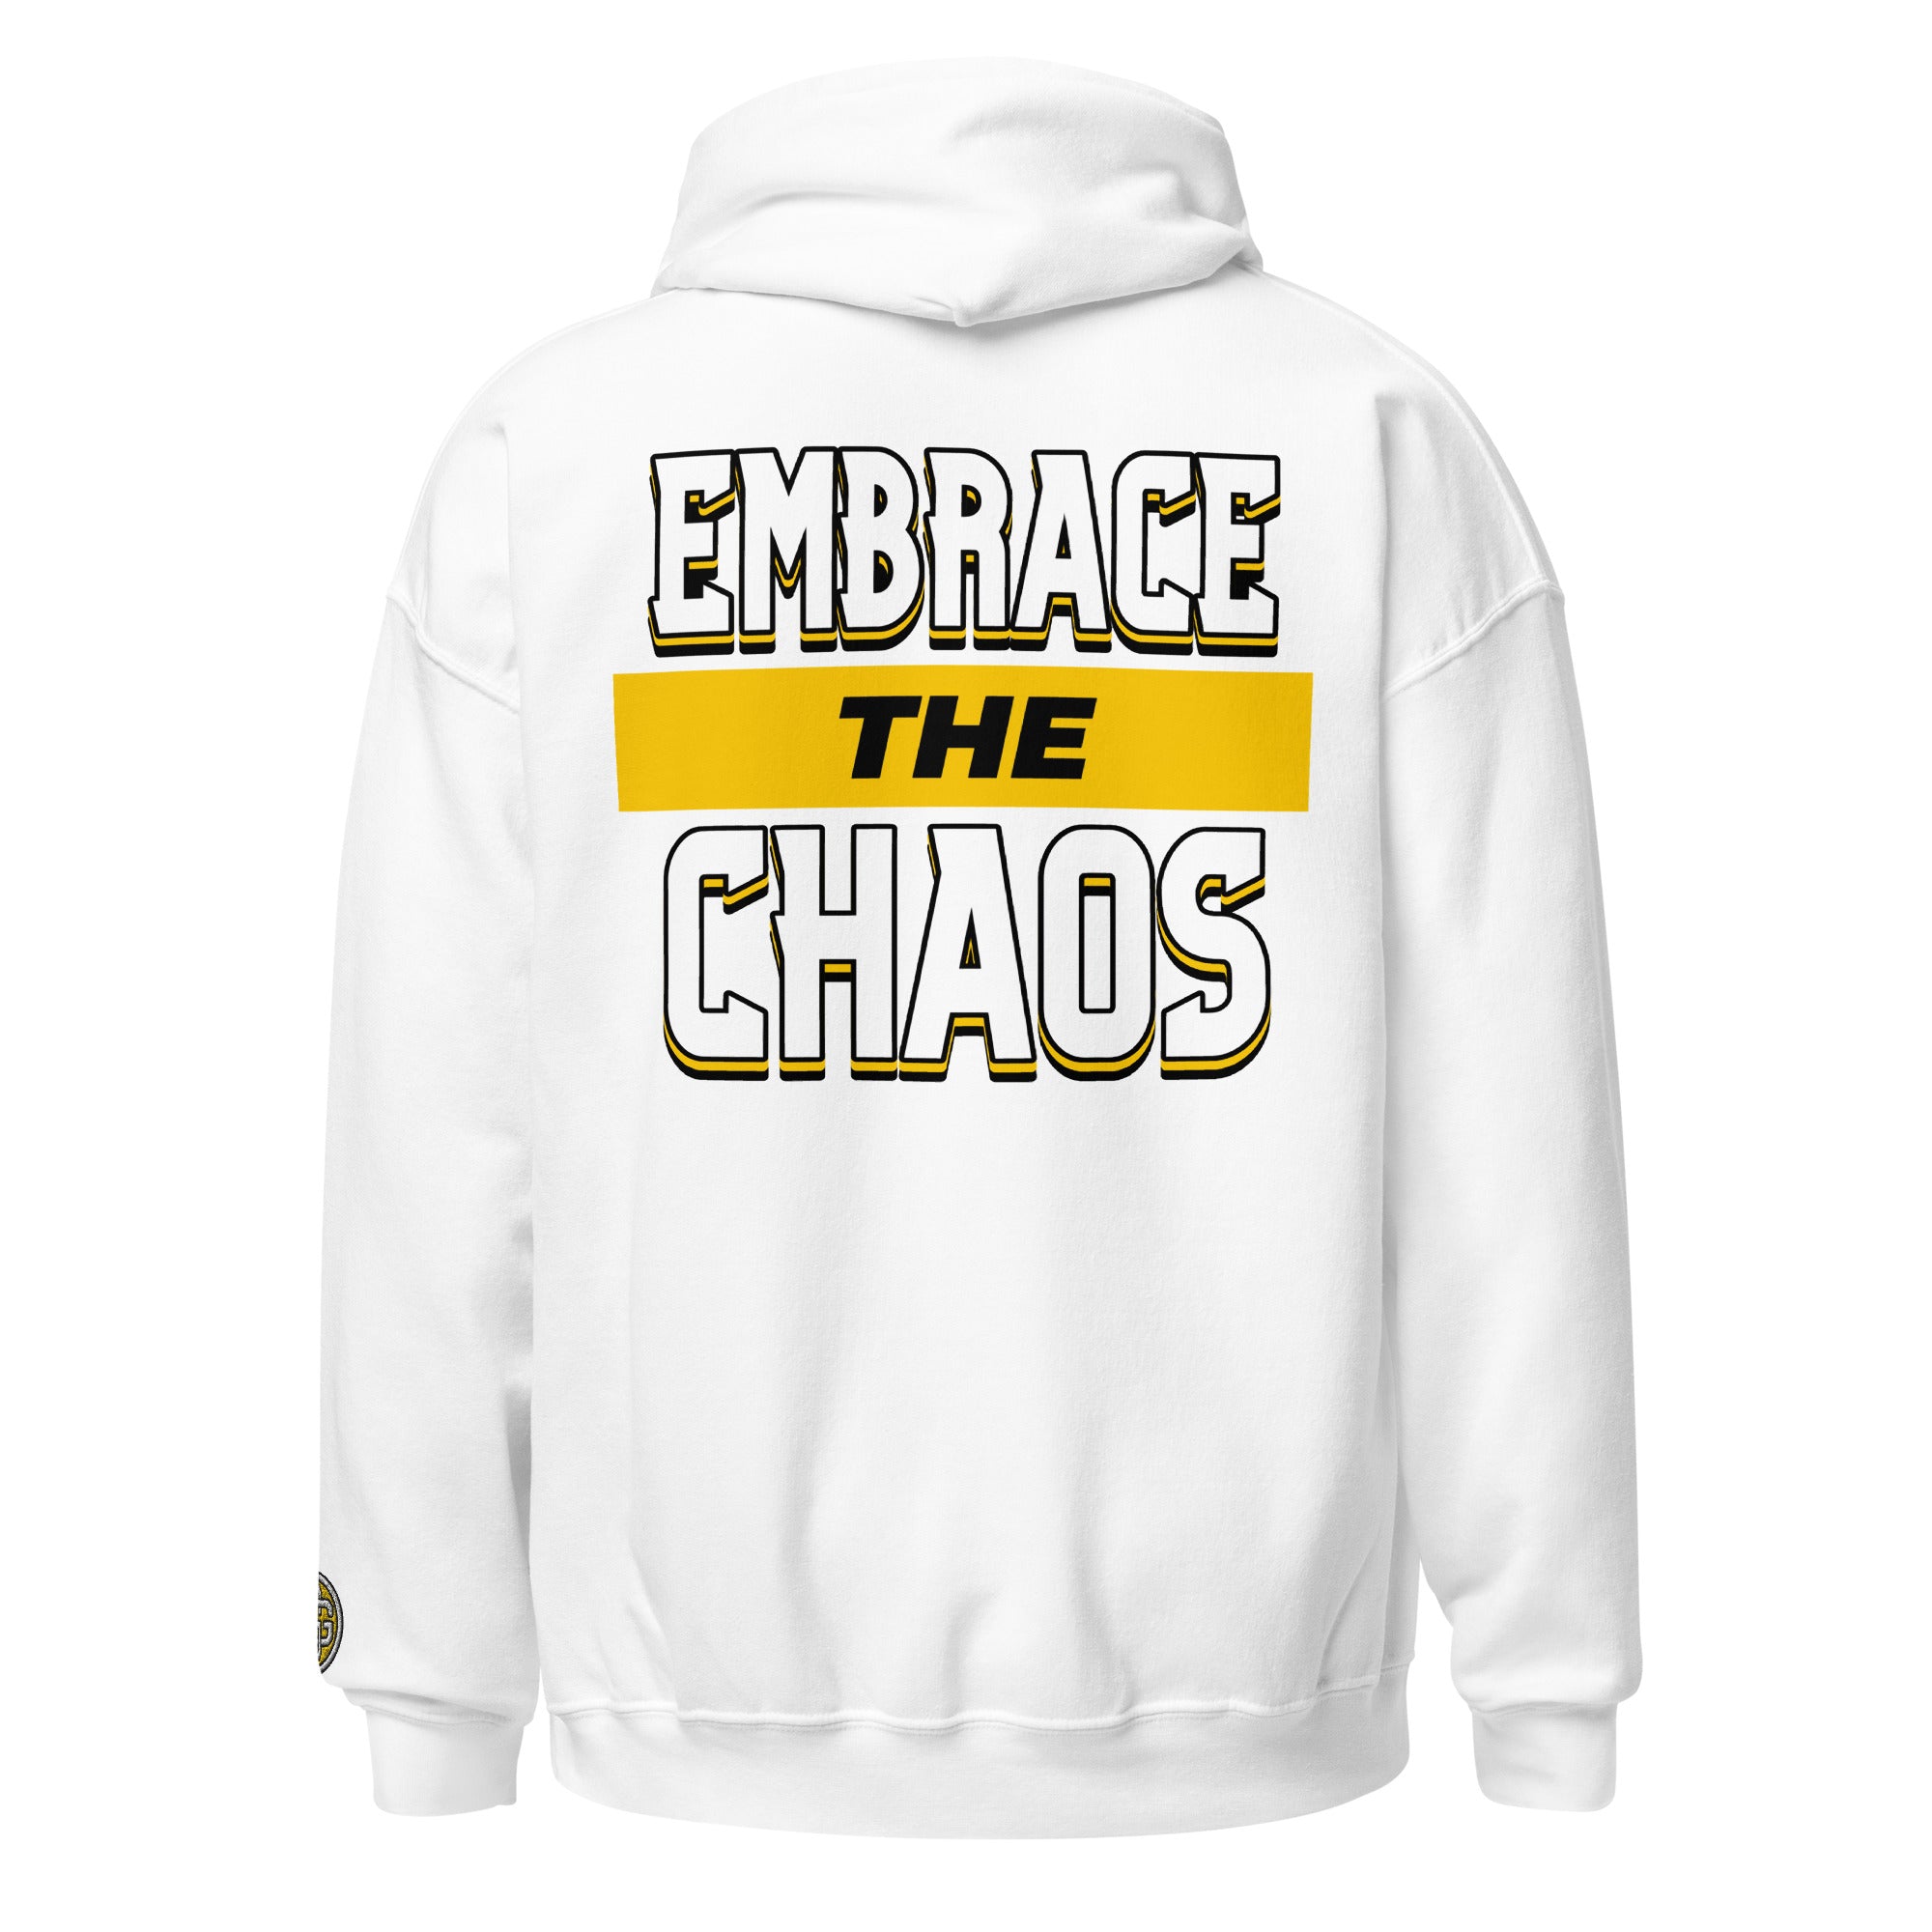 Embrace the Chaos Embroidered/DTG Unisex Hoodie